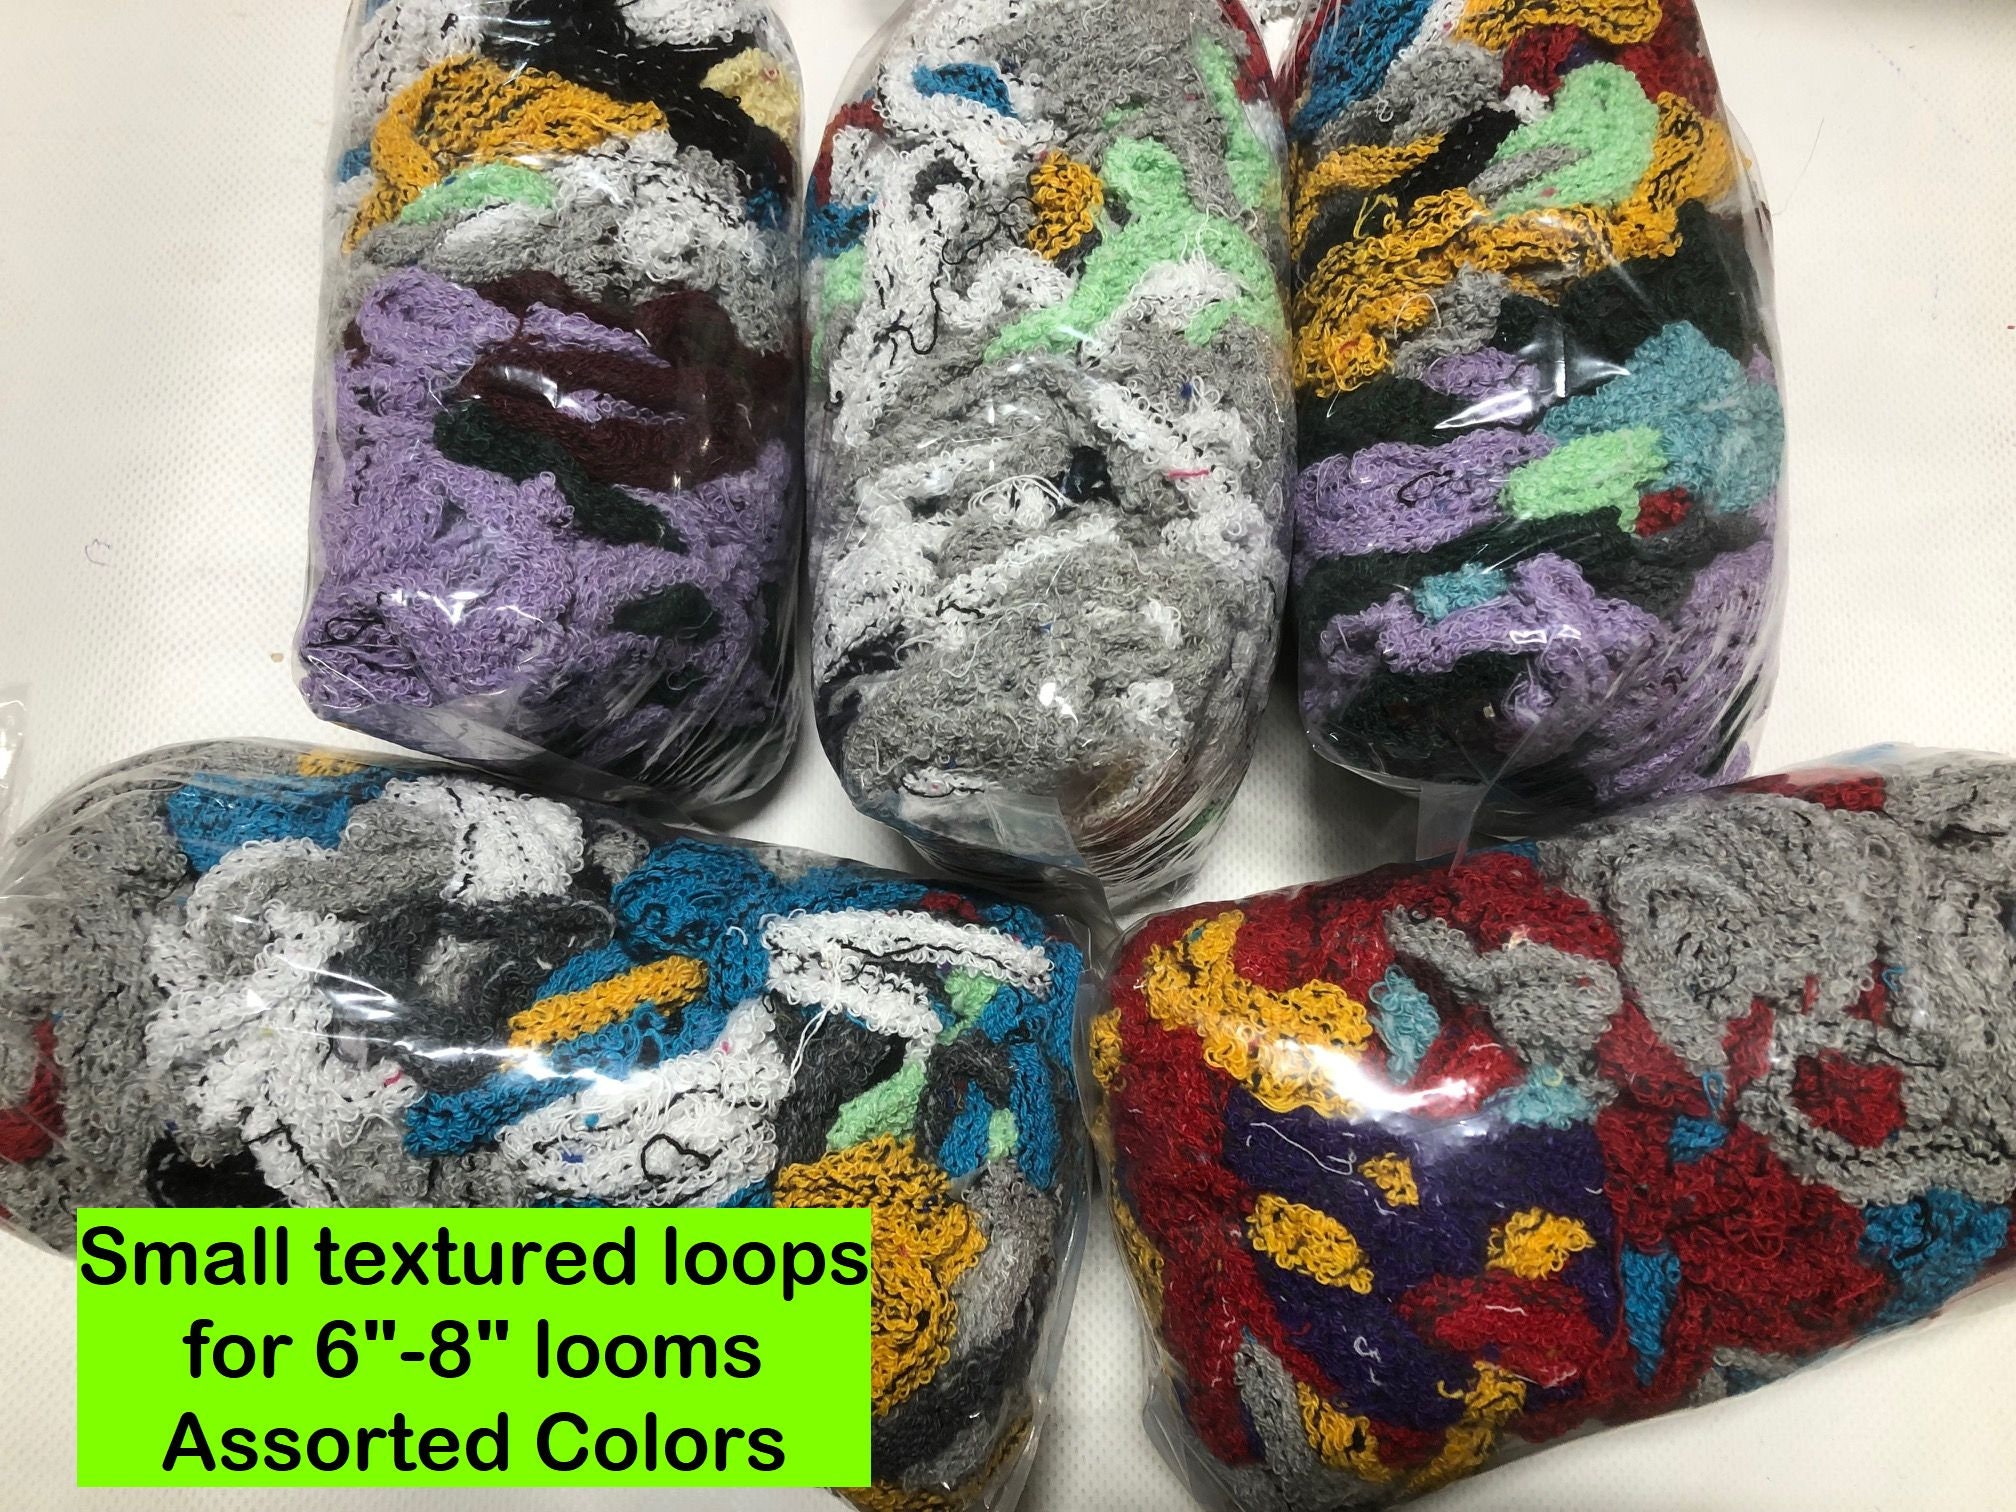 Loop Refills, WINTER WOODS Artist Blend, Colors Cotton Blend Potholder Loops,  U.S.A. Made, Crafts, Weaving, Rugs, Recycling 